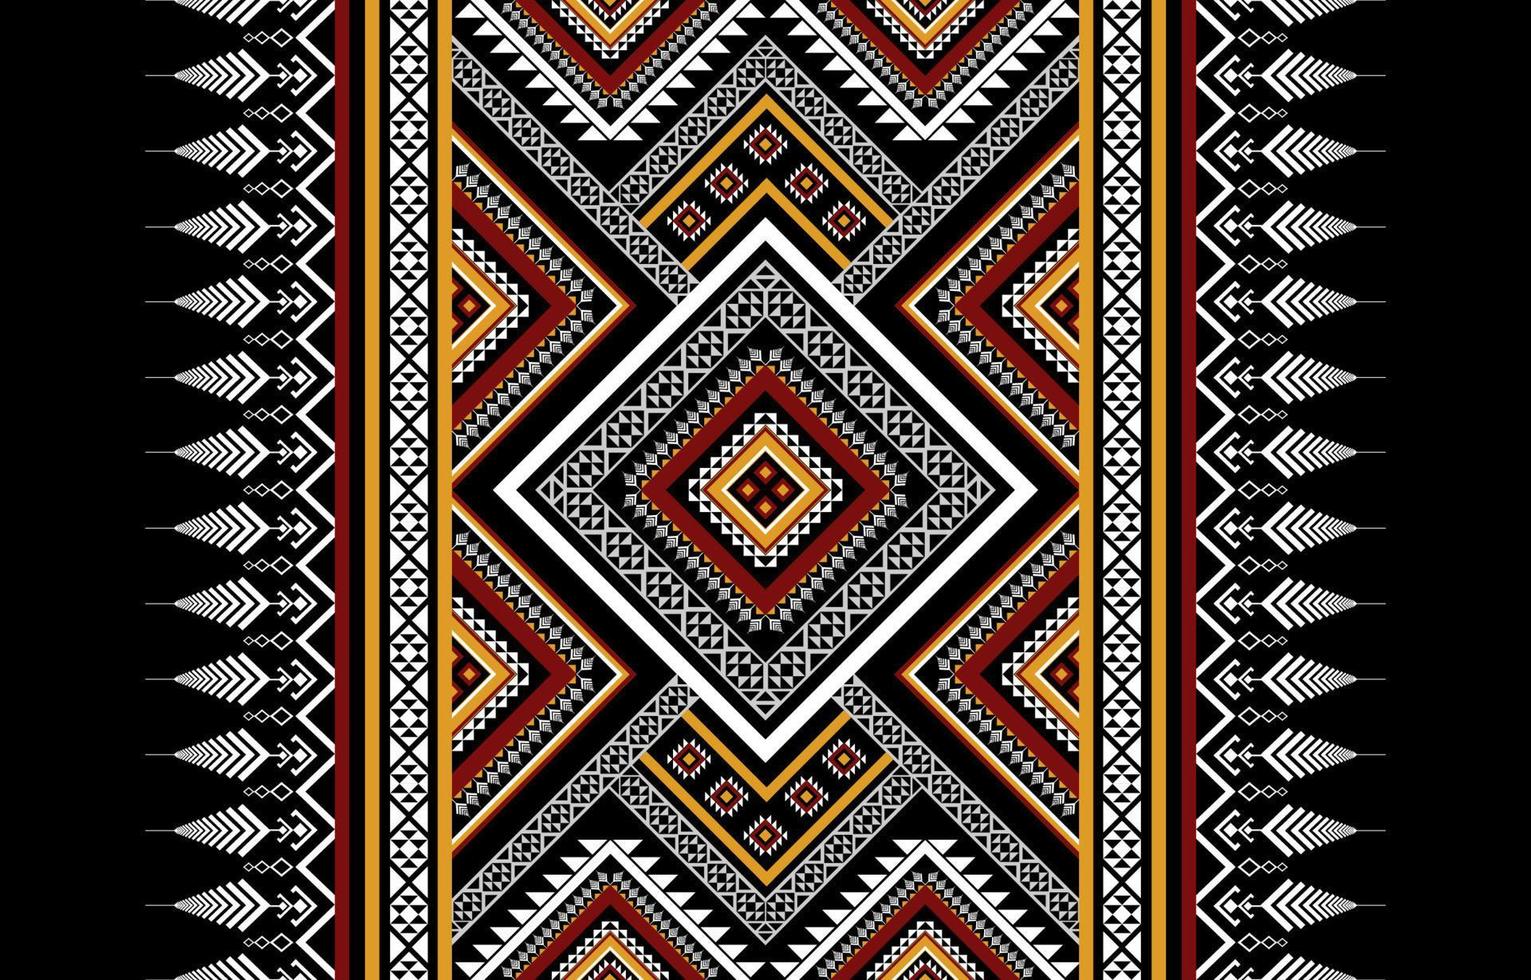 Geometric ethnic pattern tribal traditional. Aztec style. design for background, illustration, wallpaper, fabric, texture, batik, carpet, clothing, embroidery vector